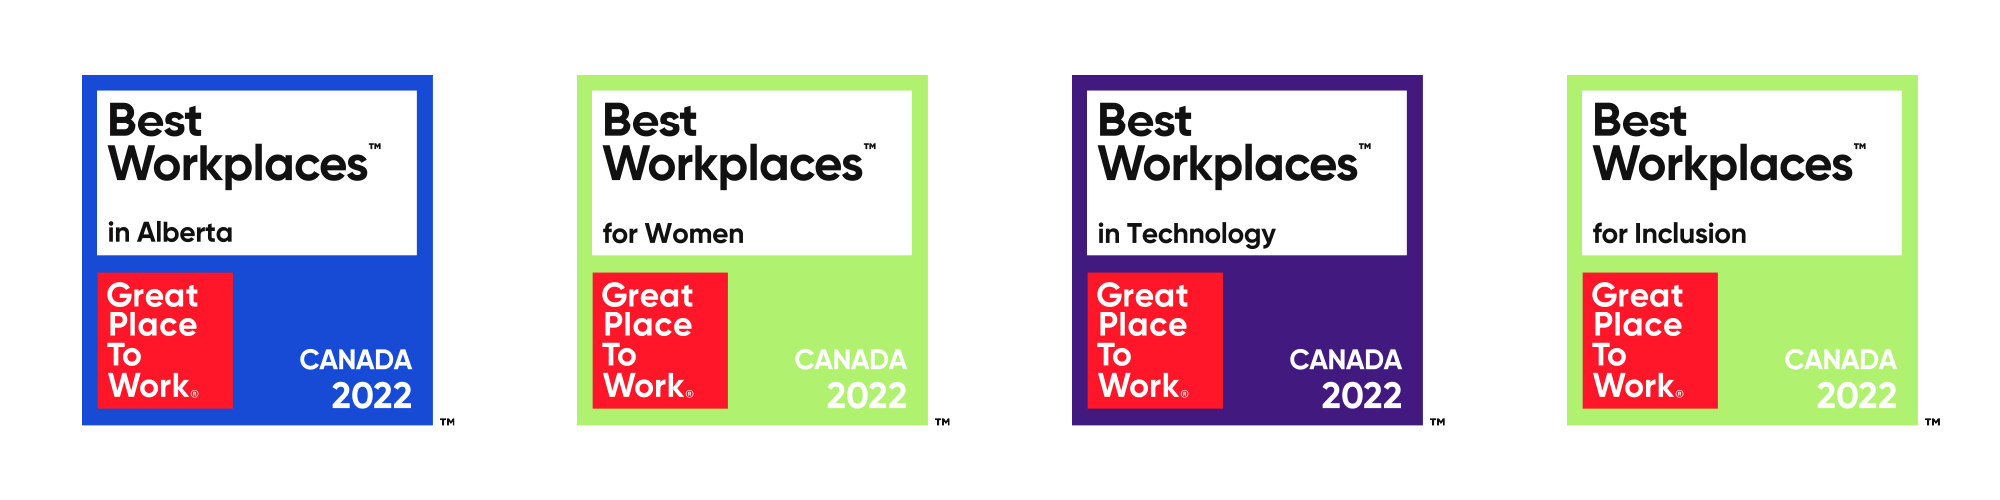 Best Workplaces in 2022